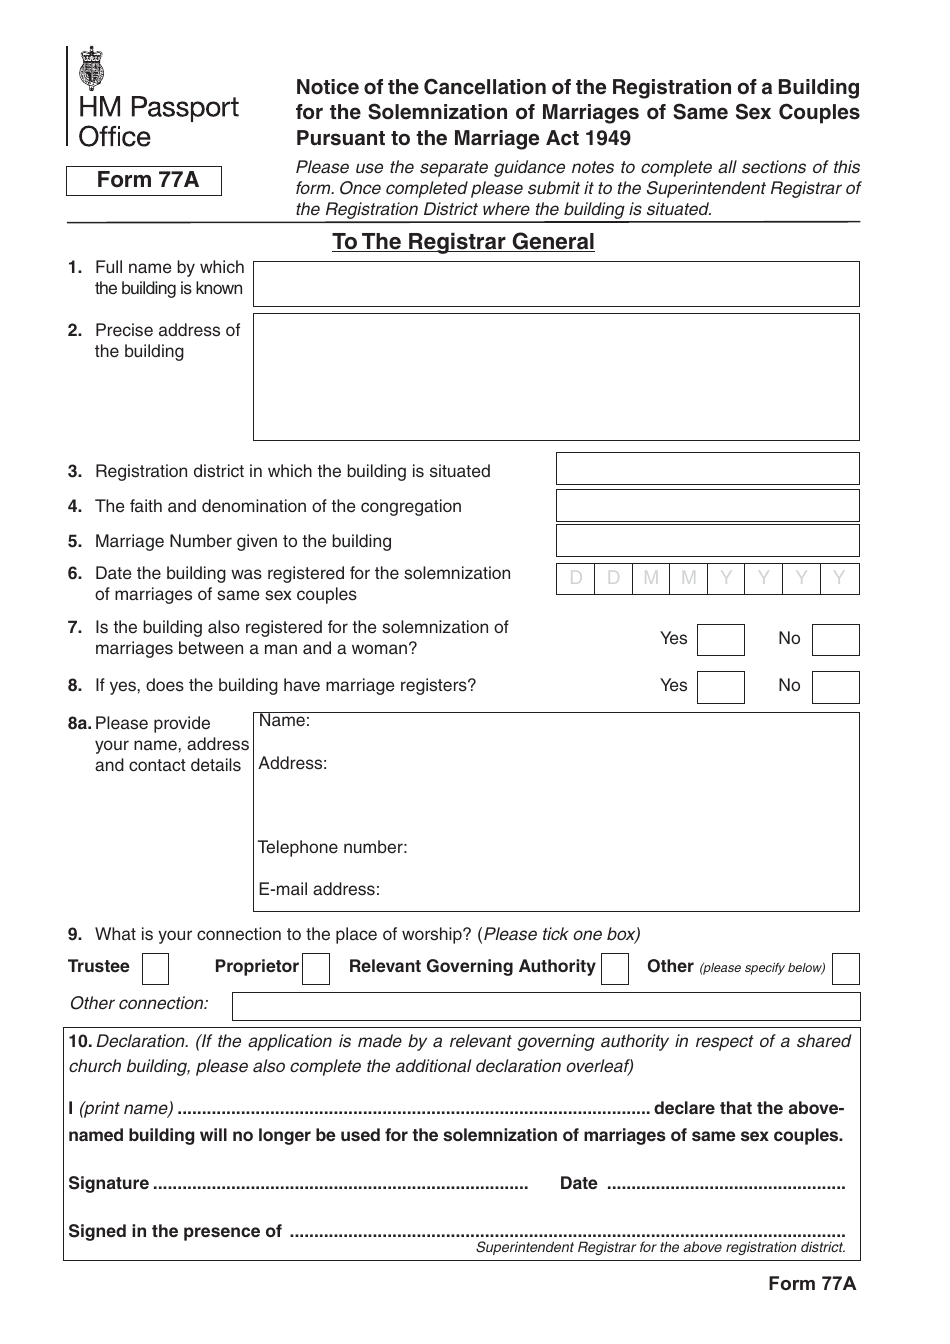 Form 77A Notice of the Cancellation of the Registration of a Building for the Solemnization of Marriages of Same Sex Couples Pursuant to the Marriage Act 1949 - United Kingdom, Page 1